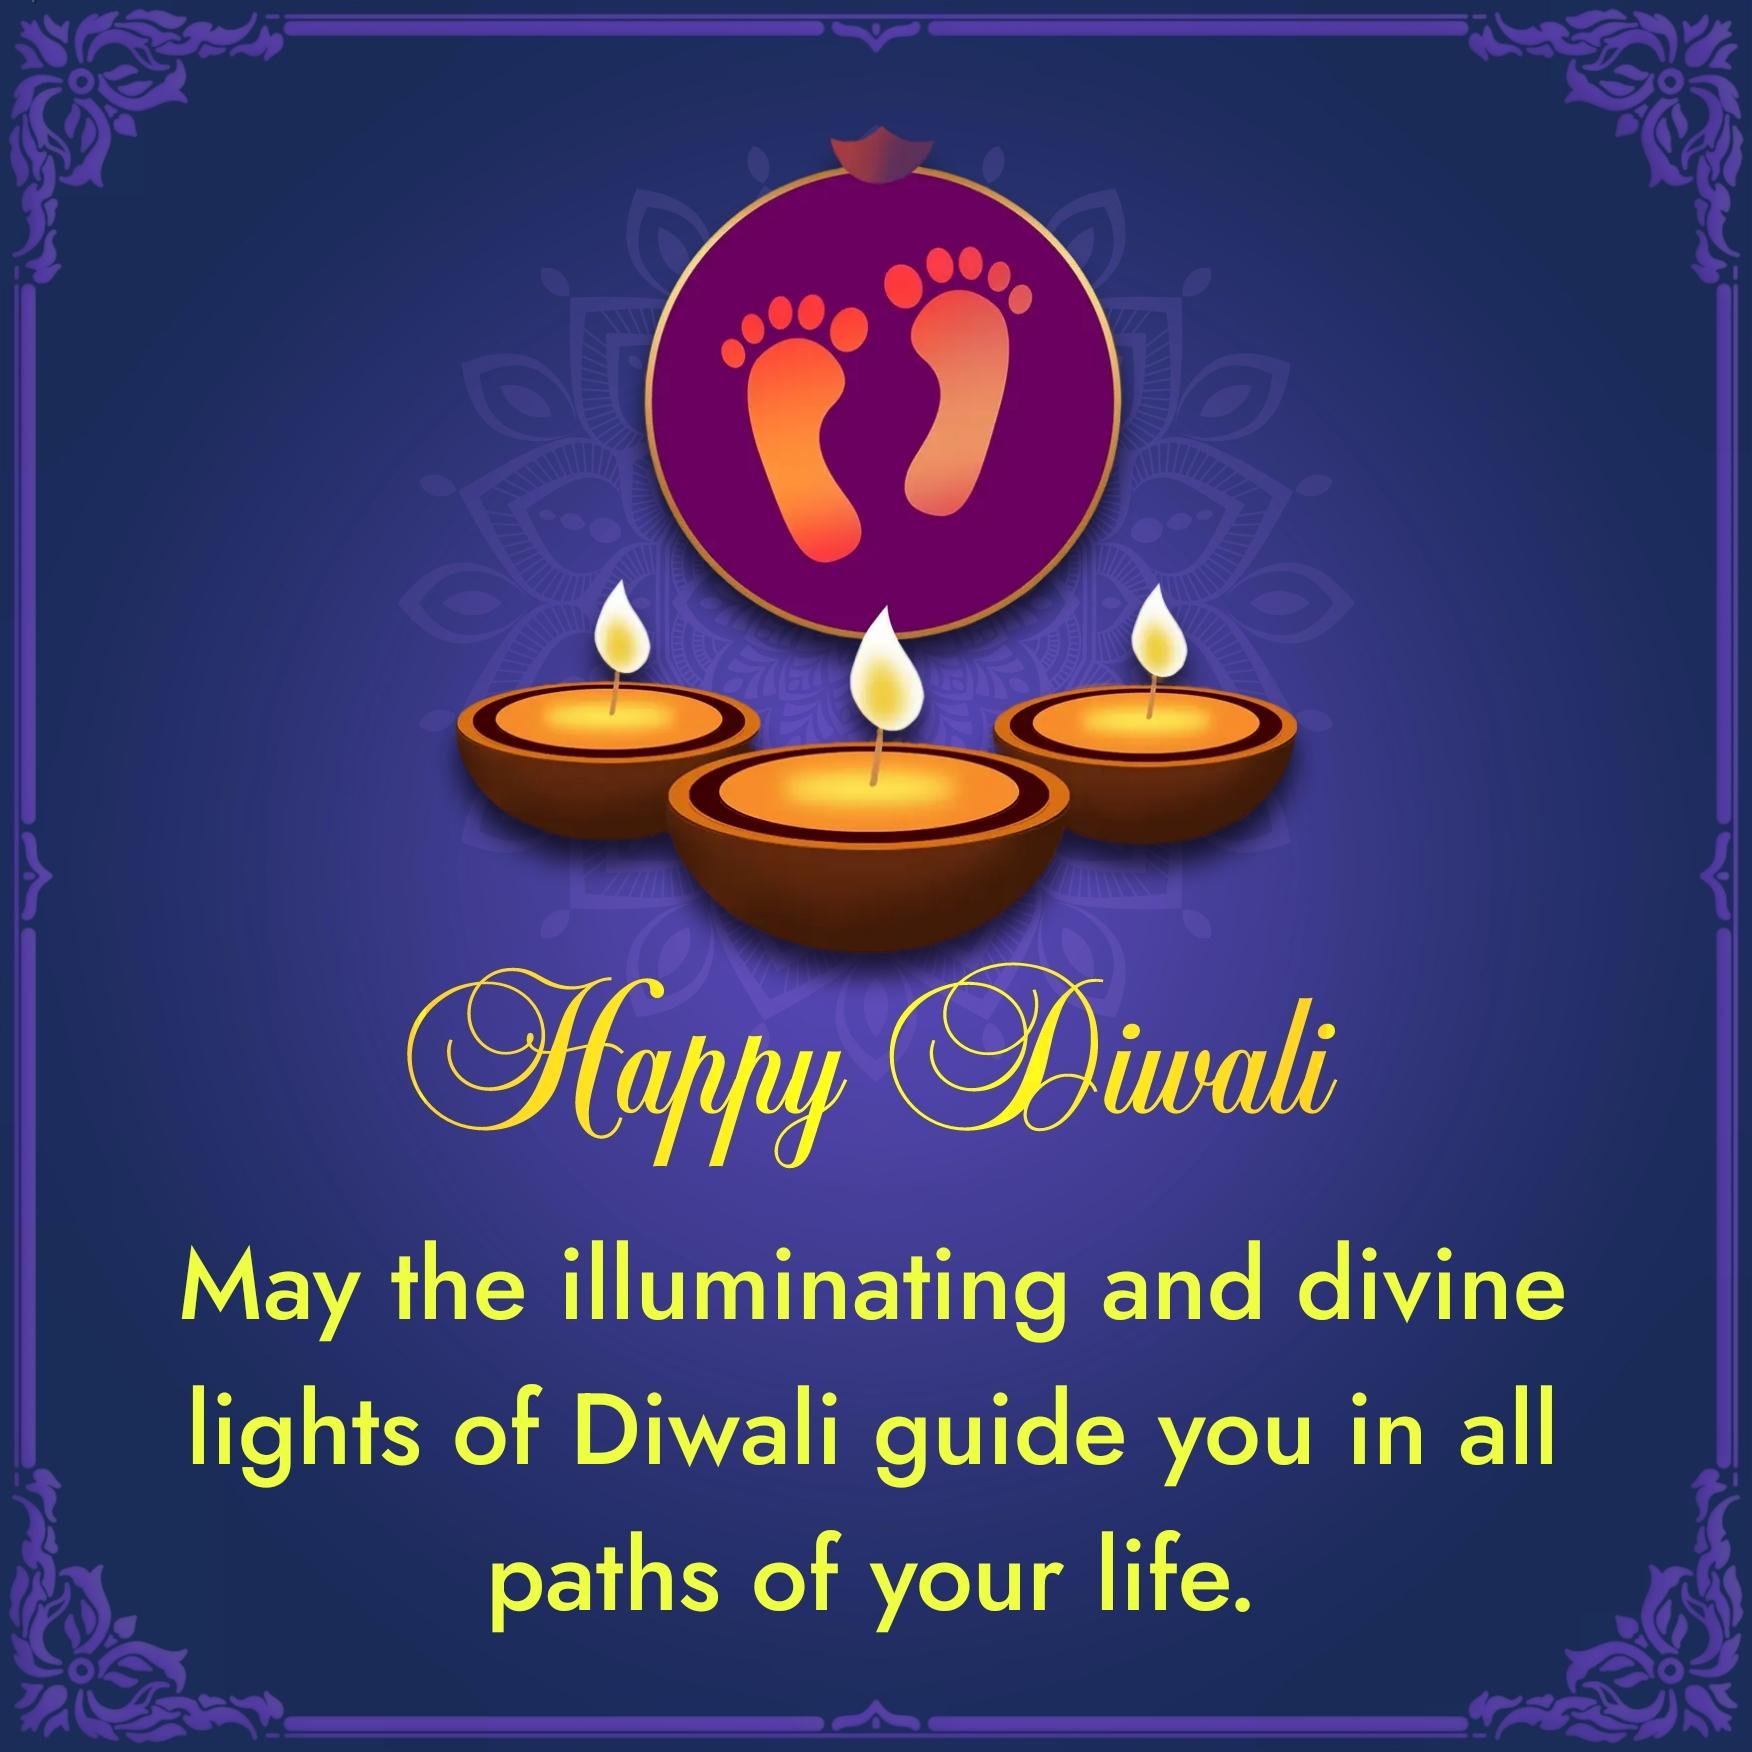 May the illuminating and divine lights of Diwali guide you